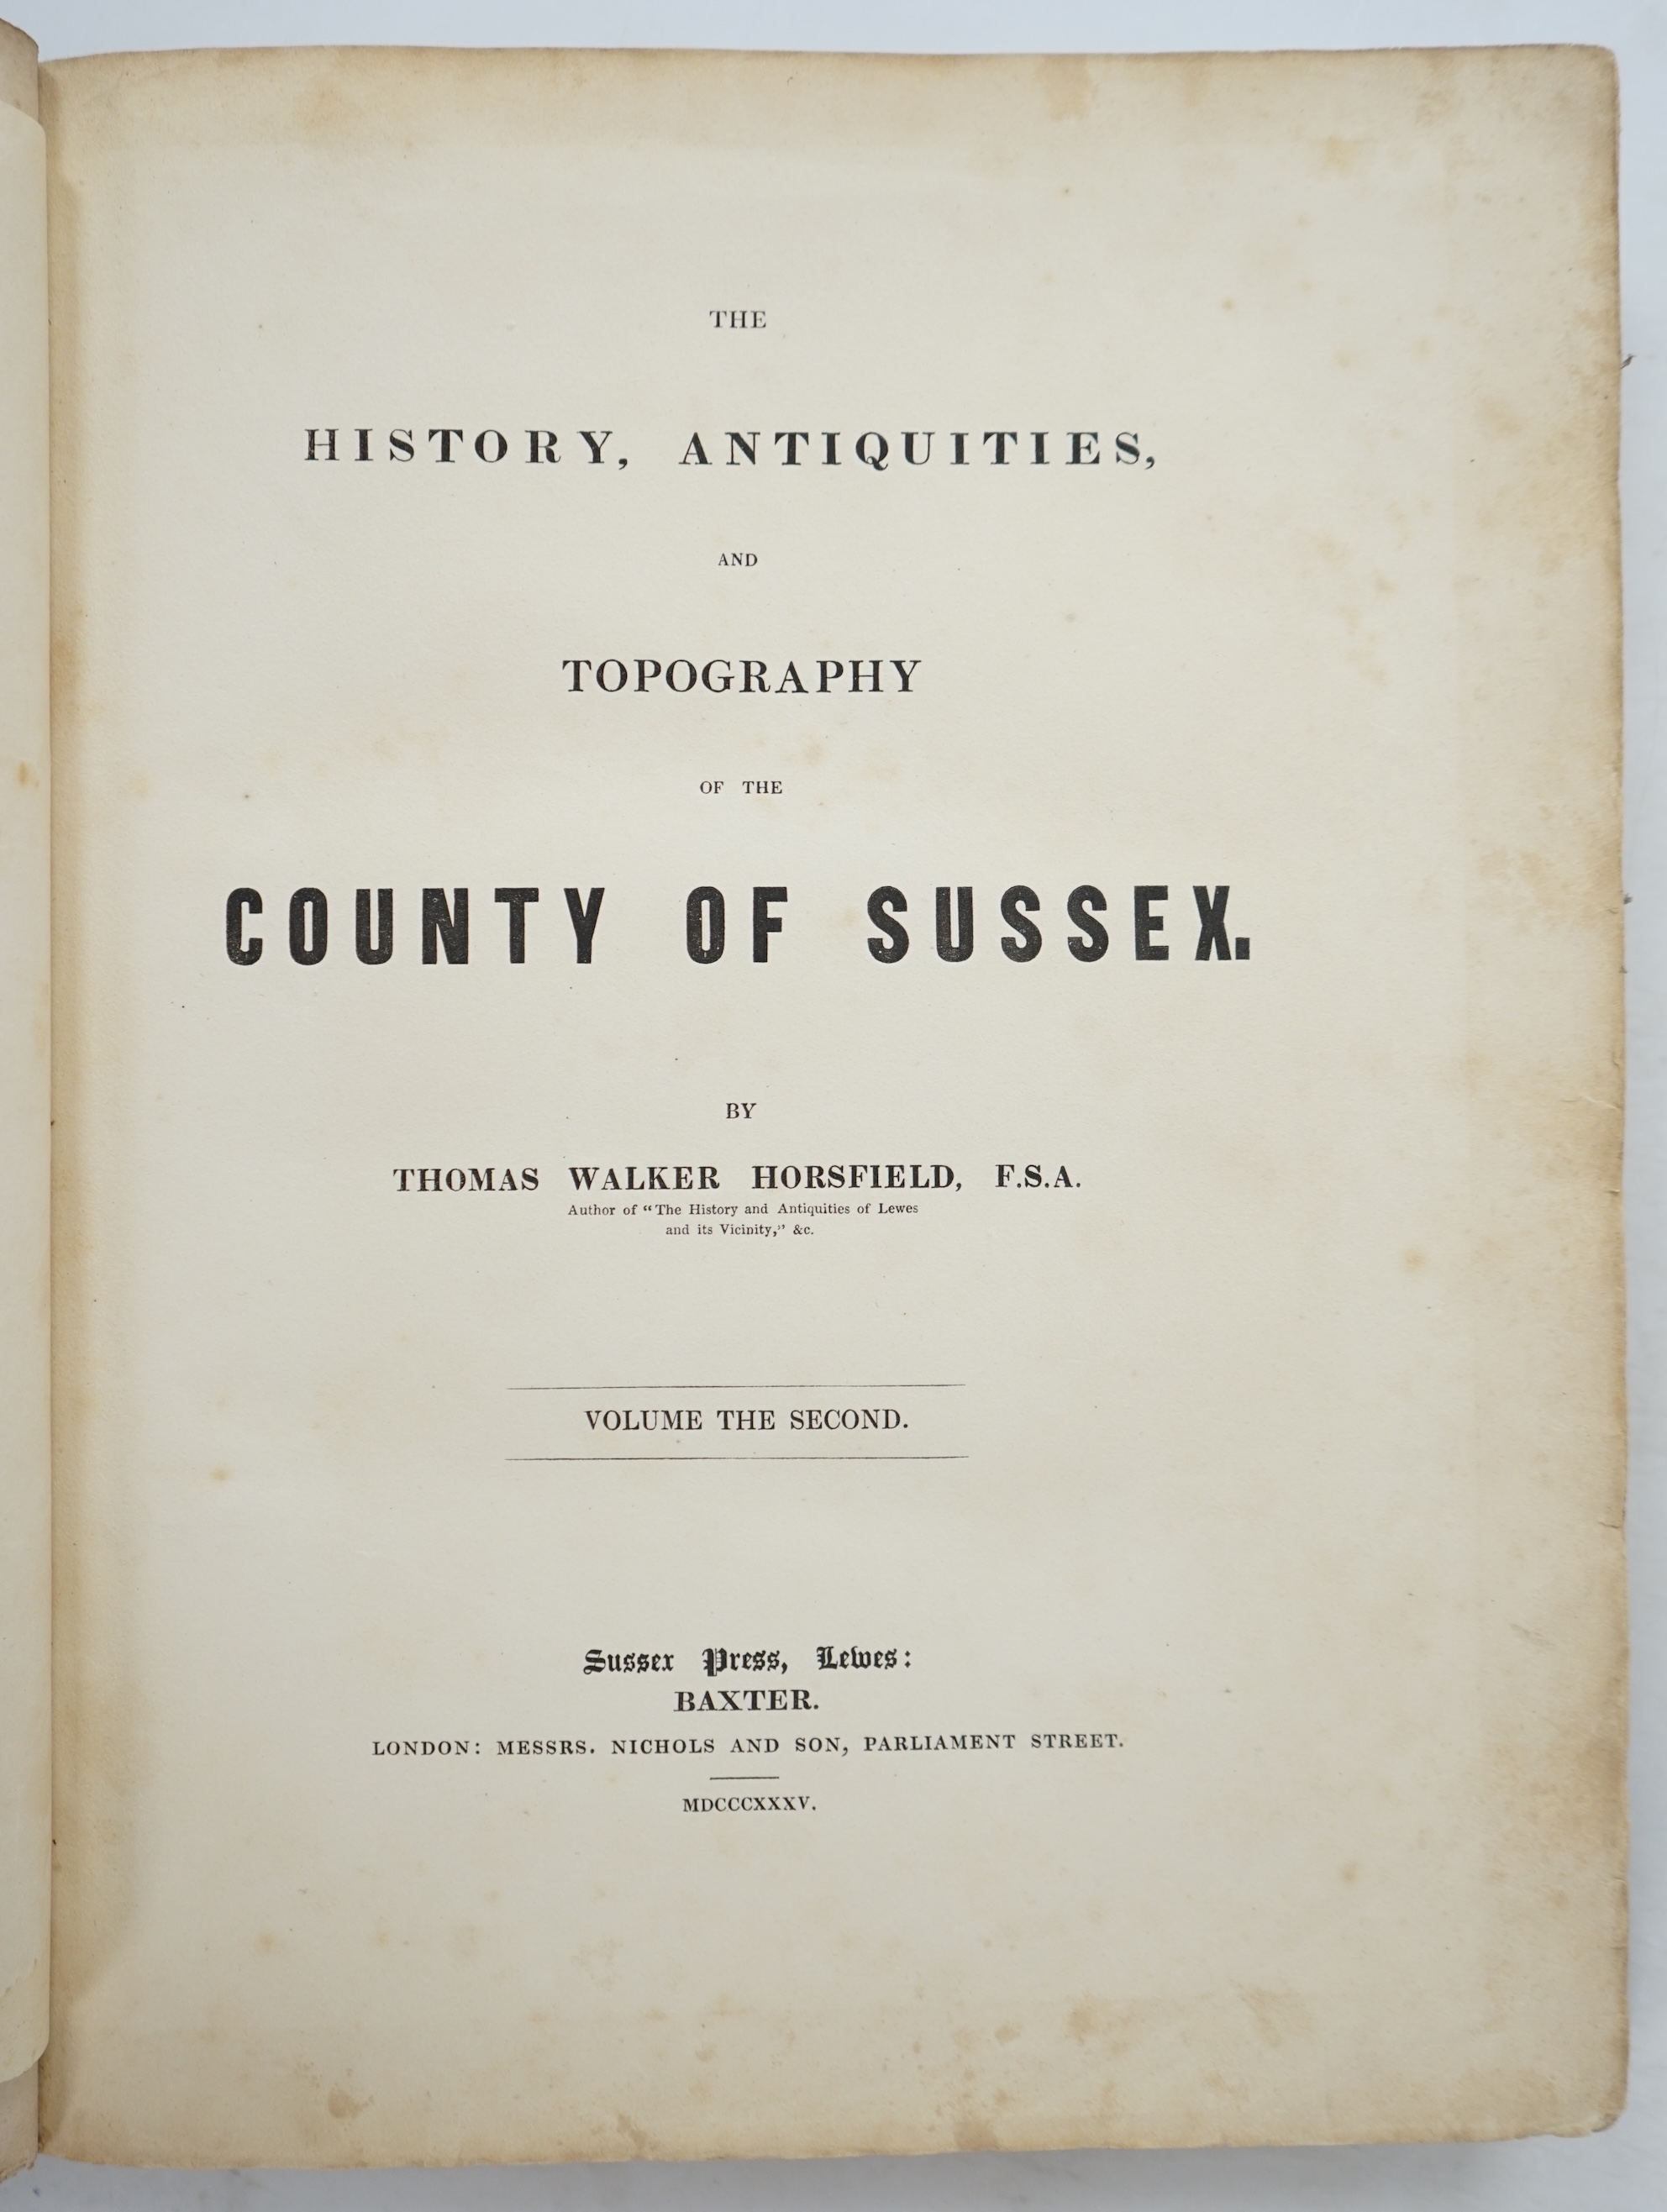 Horsfield, Thomas Walker - The History, Antiquities, and Topography of the County of Sussex, 2 vols, with 7 portraits (one a mezzotint), 2 folded pictorial maps and 49 other engraved maps, gilt ruled half morocco with ma